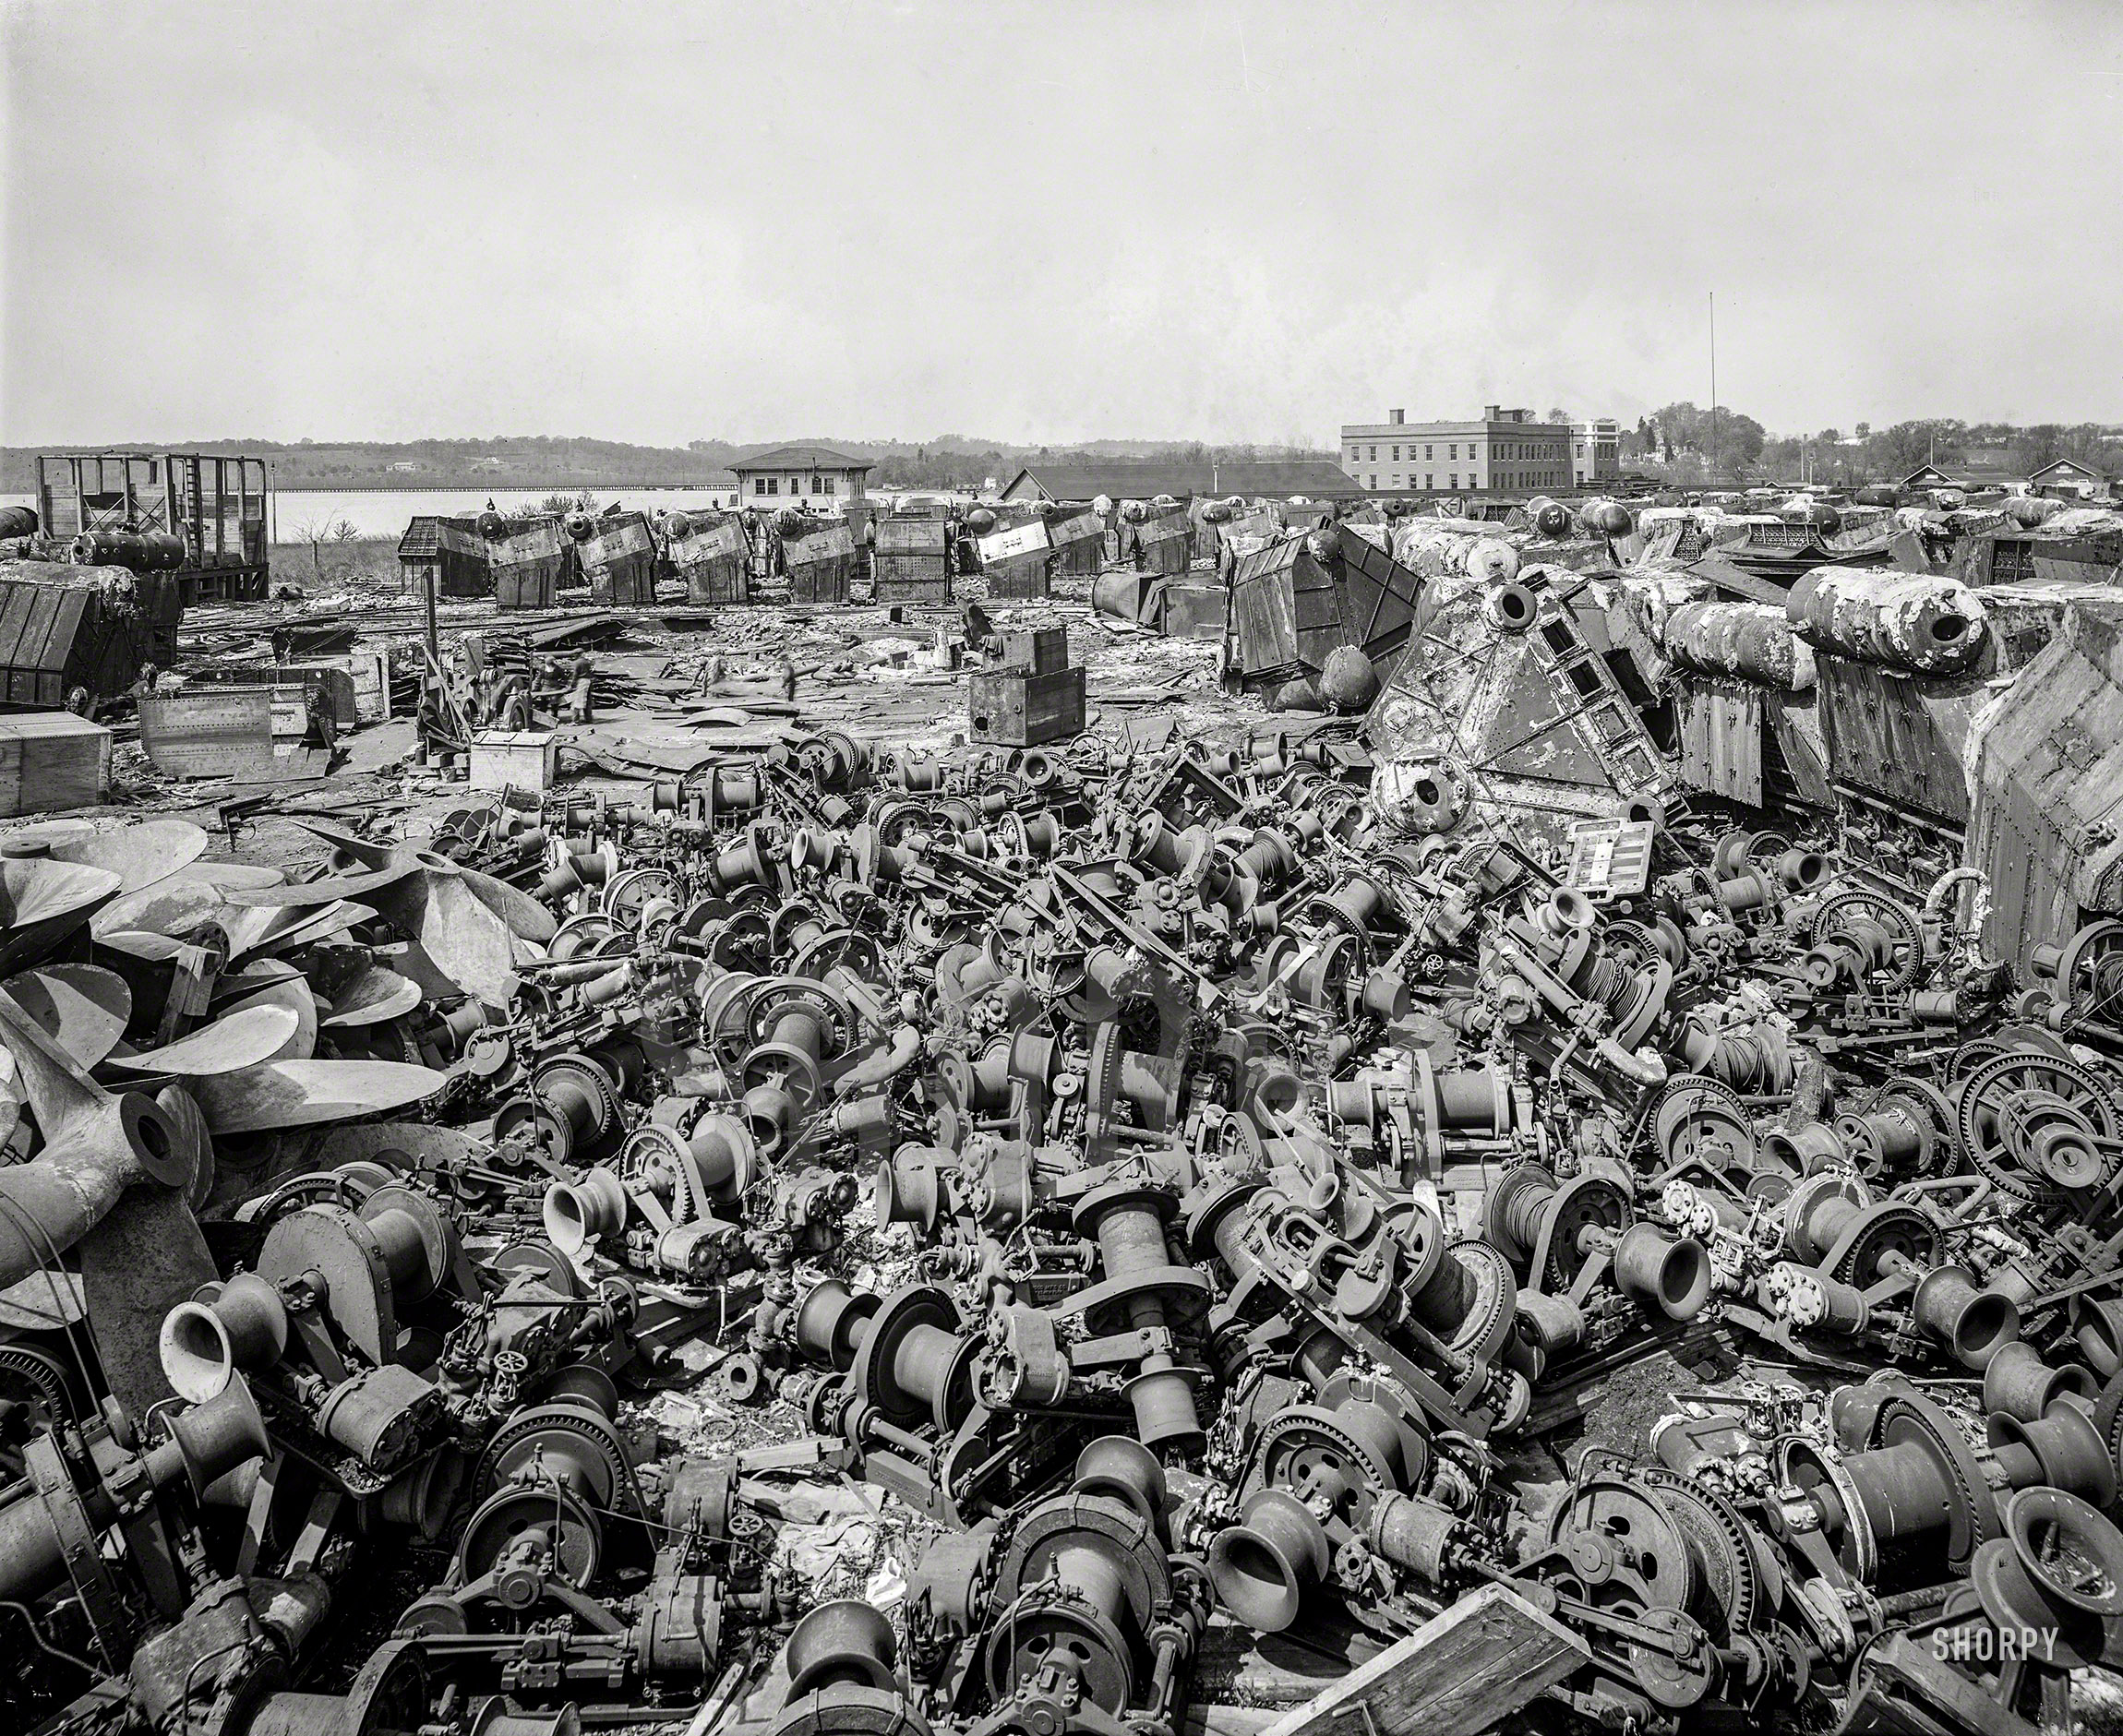 1925. "Western Marine & Salvage Co., Alexandria, Va." Just the place to pick up a salty winch or crusty capstan. National Photo Co. glass negative. View full size.